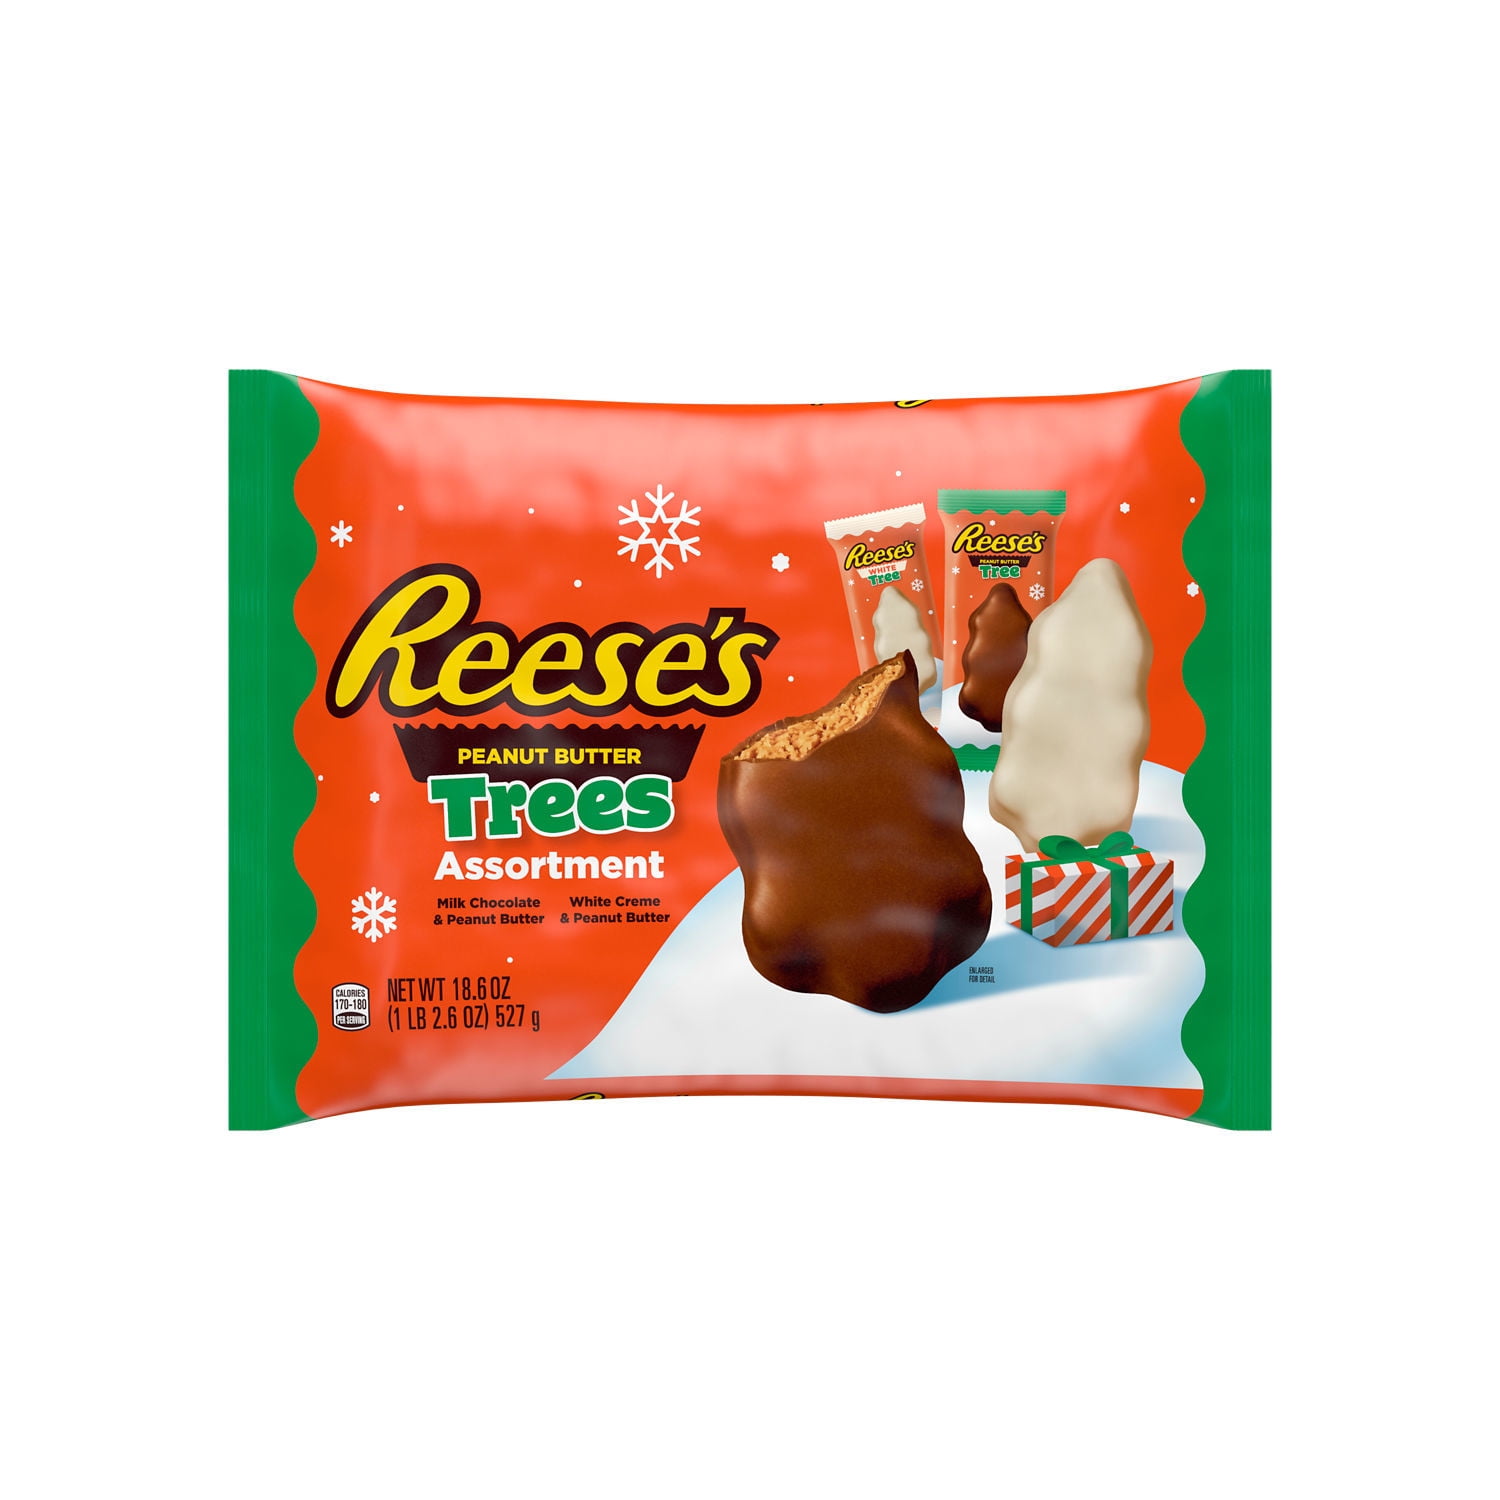 REESE'S, Assorted Milk Chocolate, White Creme Peanut Butter Trees Candy, Christmas, 18.6 oz, Bag